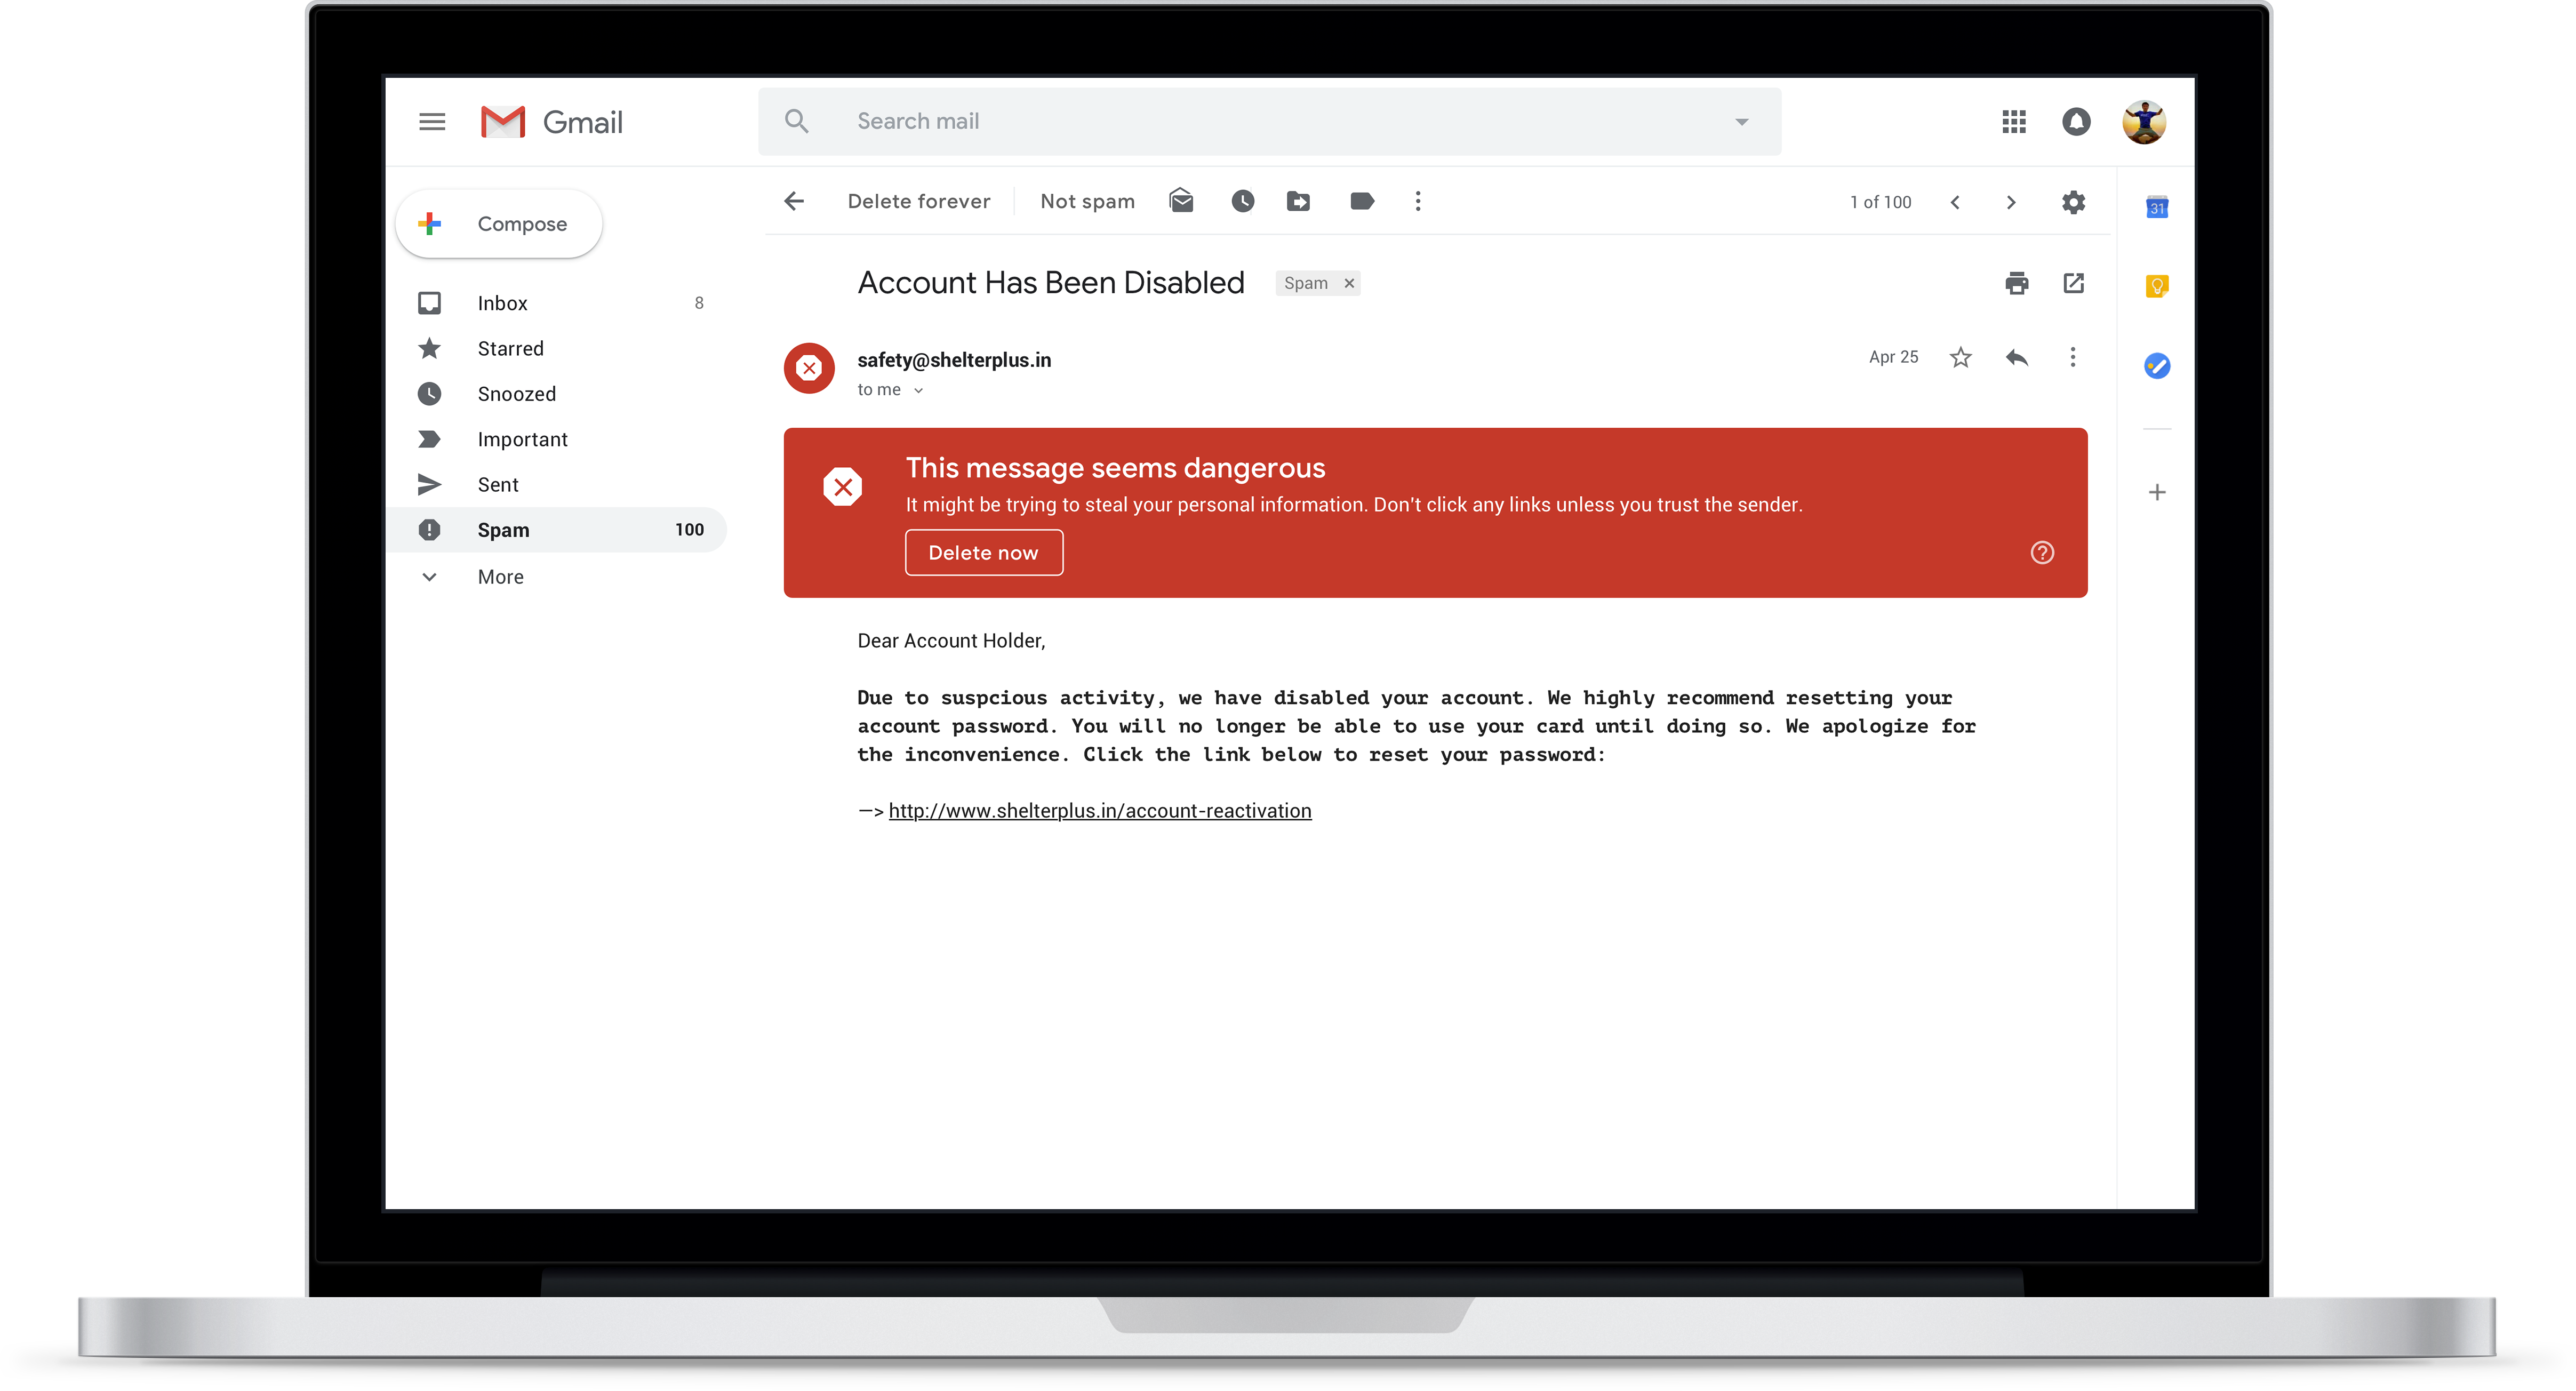 gmail's new, more assertive security warnings